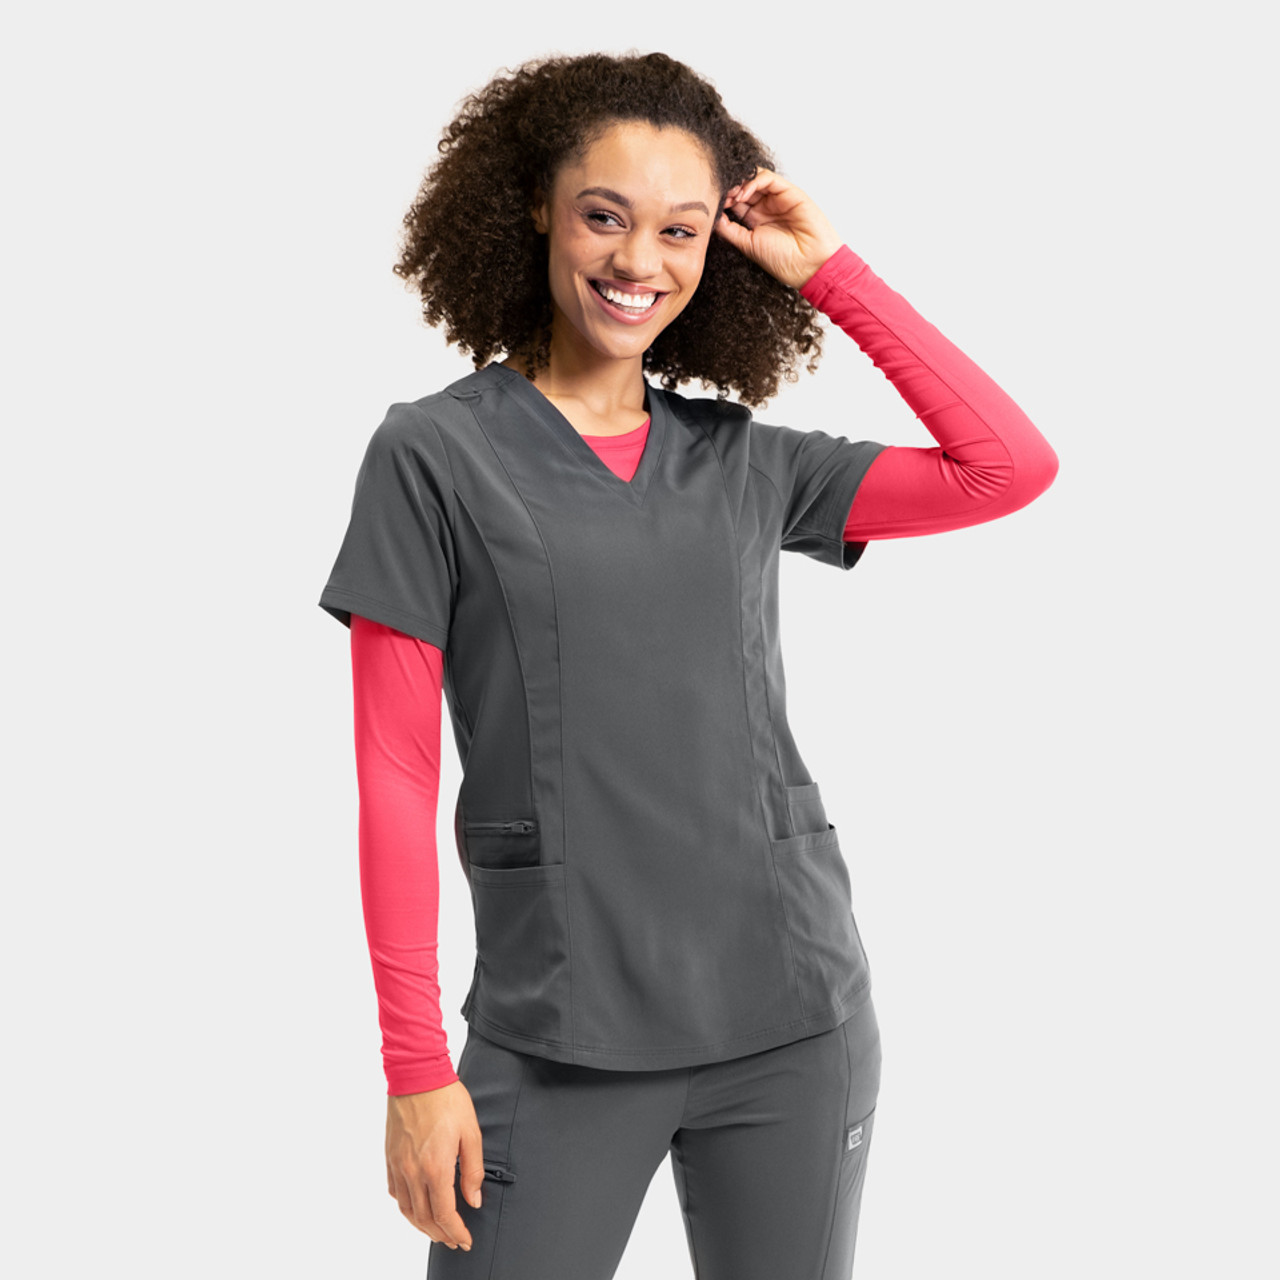 Elevate style 181003 by IRG : Women's V Neck Scrub Top